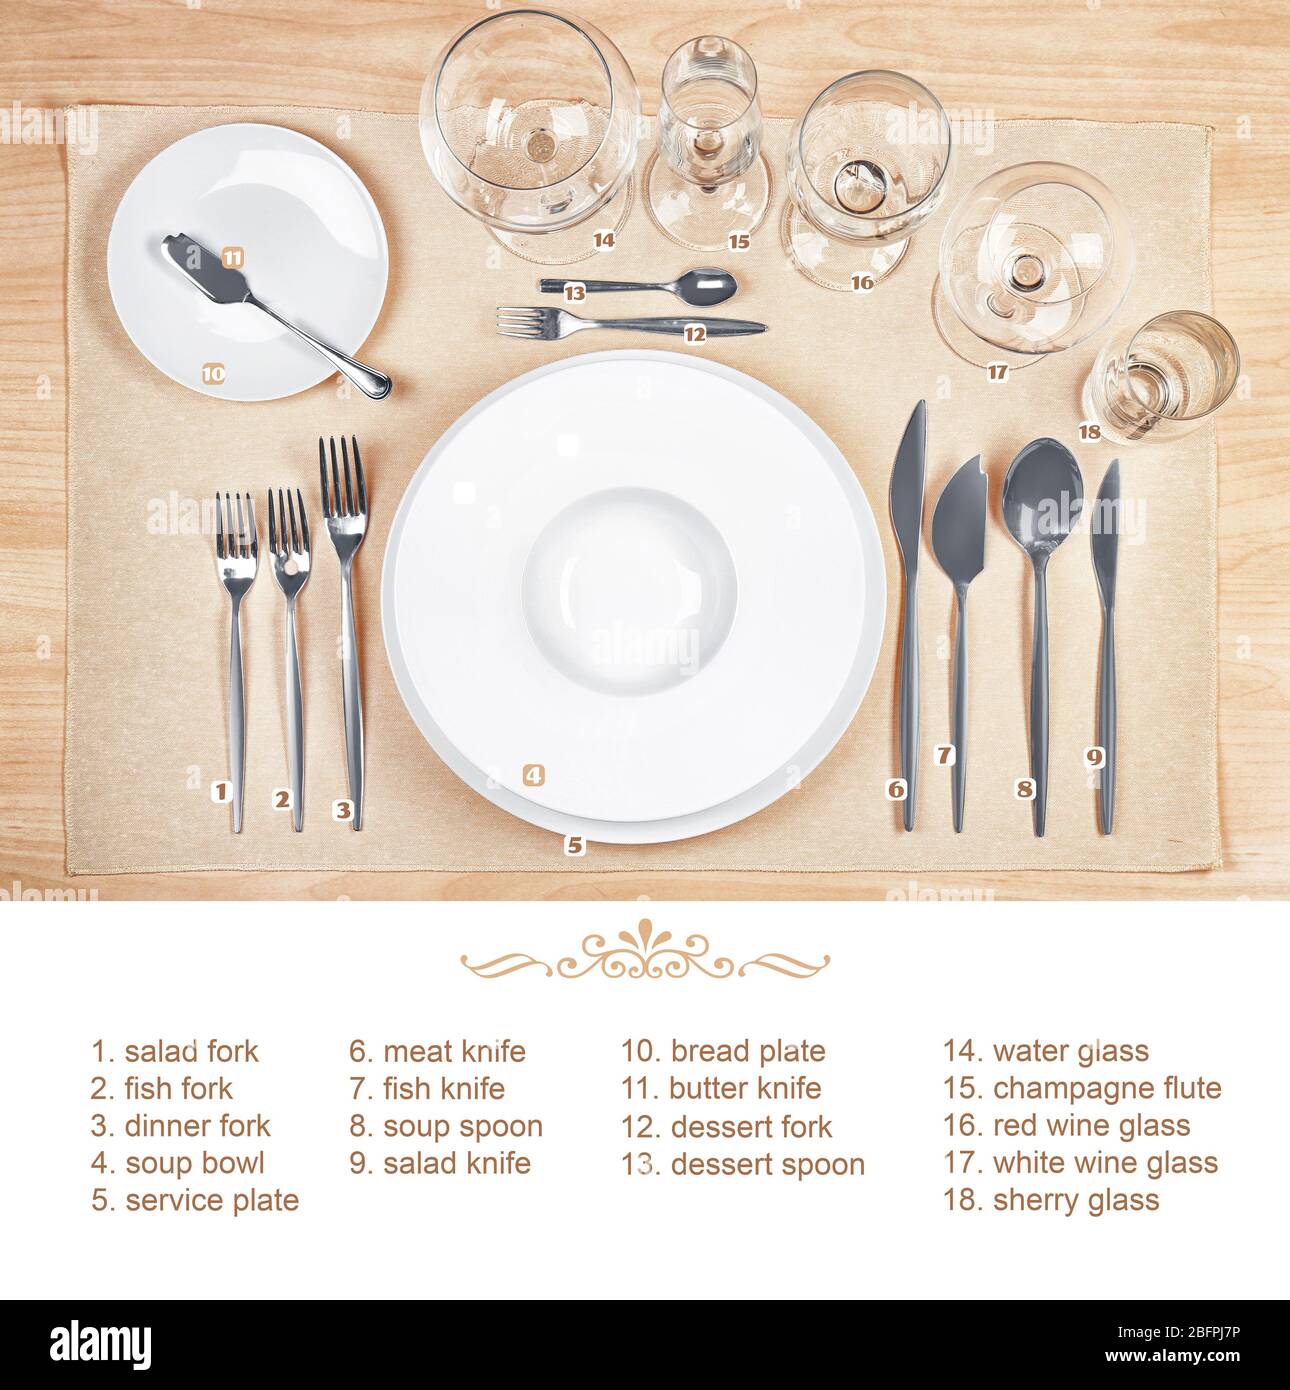 Arrangement Of Dishware And Cutlery On Wooden Background Table Setting Rules And Etiquette Stock Photo Alamy